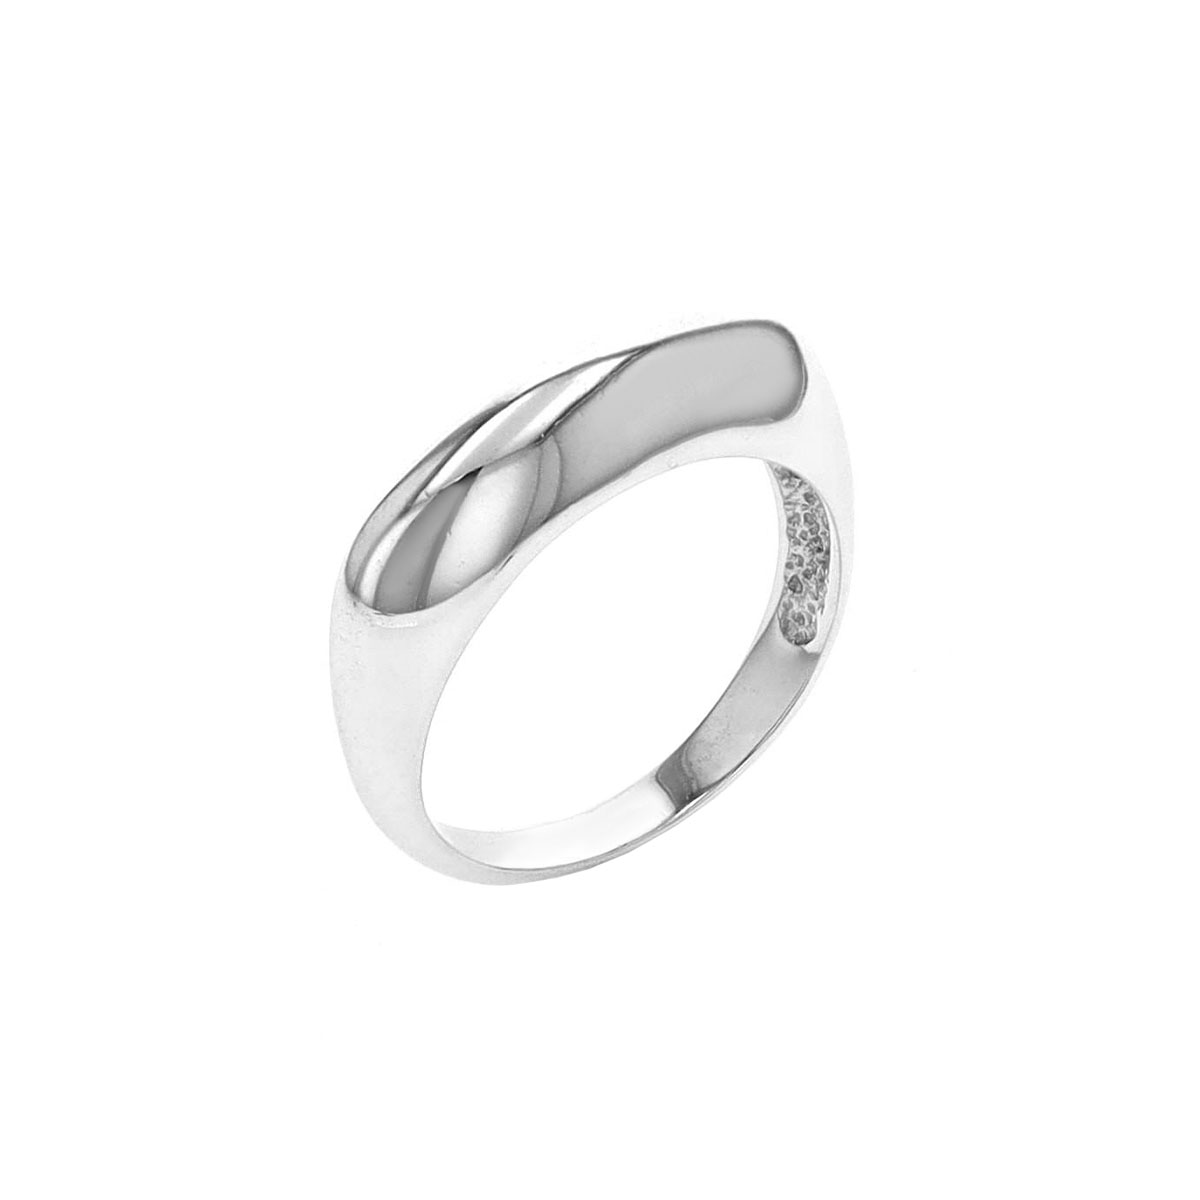 Estate 14K White Gold Arched Square Top Ring